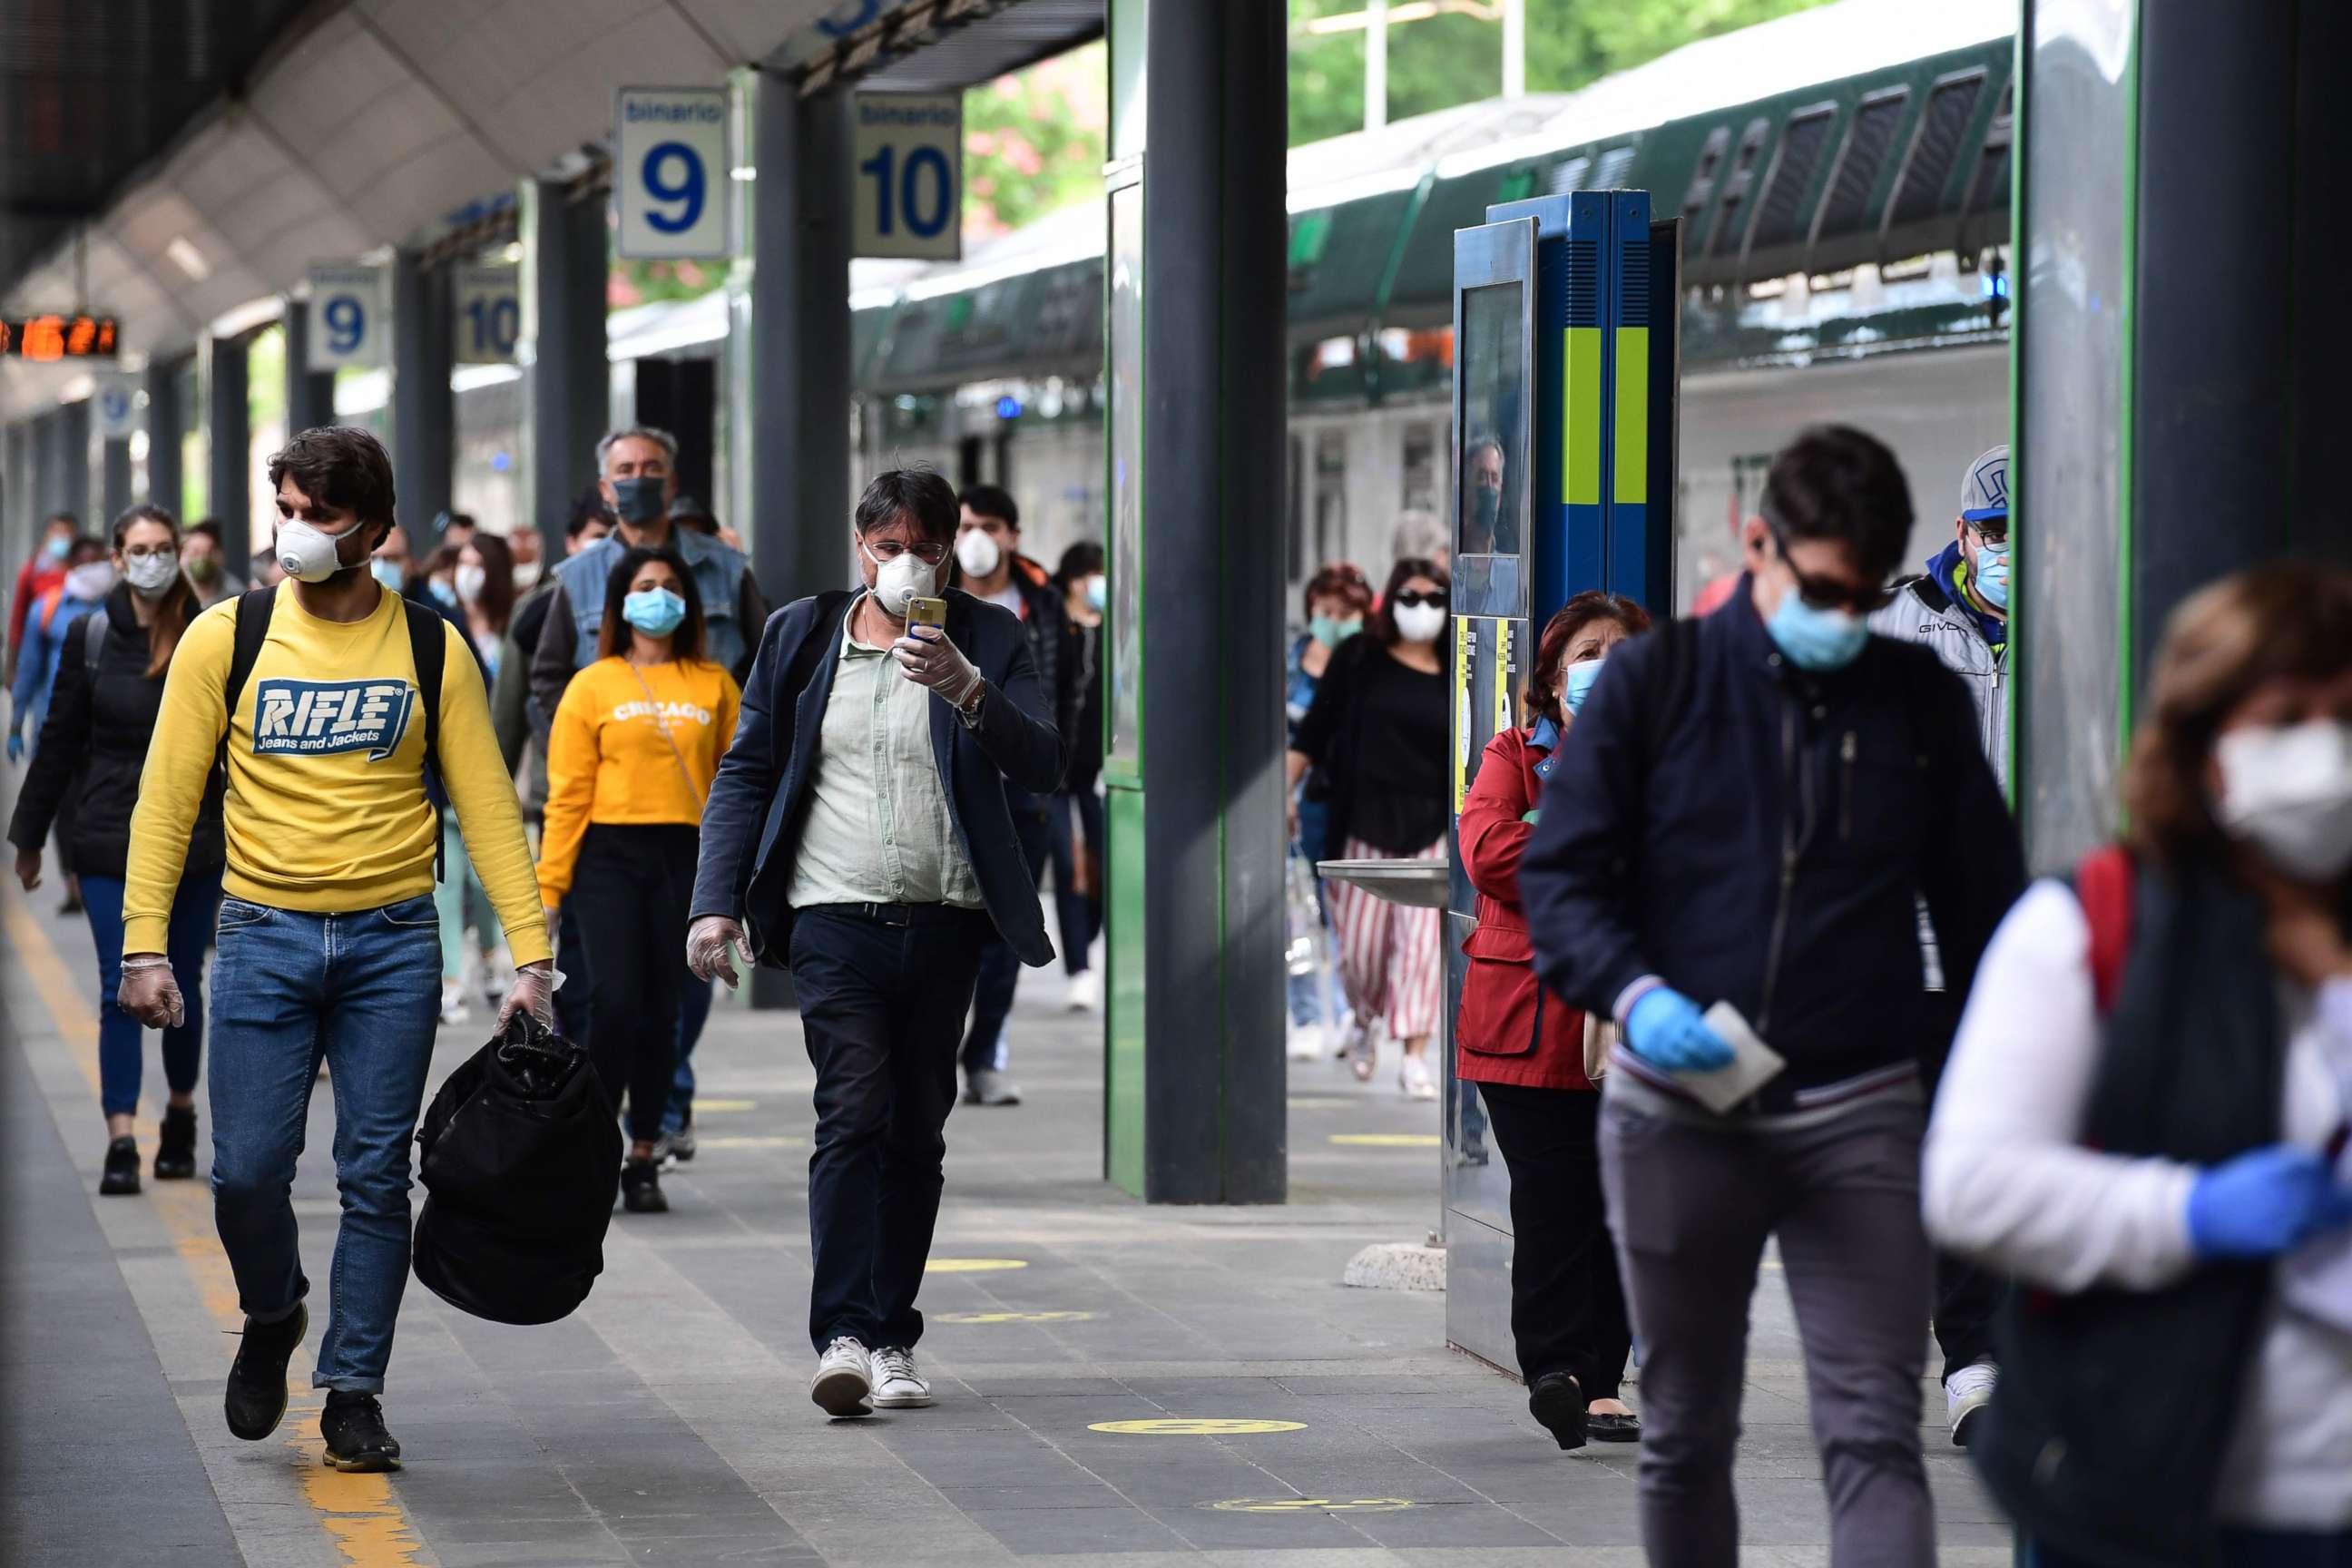 PHOTO: Commuters arrive from a regional train at the Cardona railway station in Milan on May 4, 2020, as Italy starts to ease its lockdown aimed at curbing the spread of the novel coronavirus.